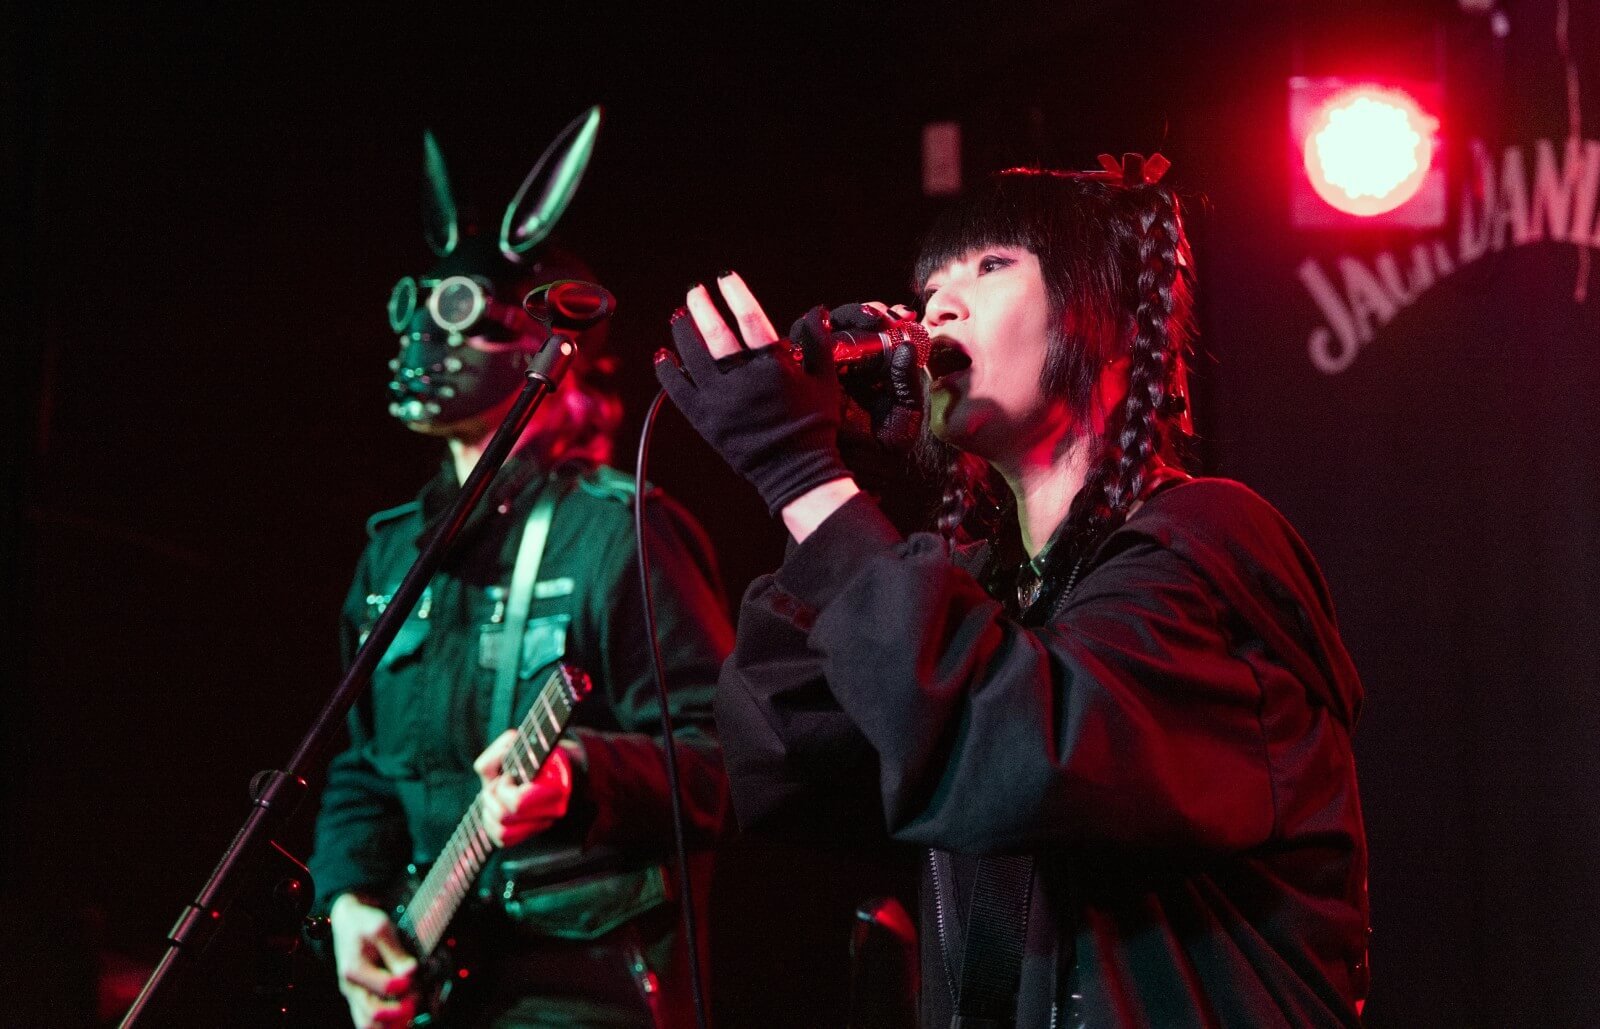 PSYDOLL at The Sunflower Lounge (Birmingham). Both members are dressed in dark clothes. One of the members of PSYDOLL is wearing a maks with seemingly bunny ears and plays the guitar, while the other member is singing. | Photography by James Grant (wonderlens)